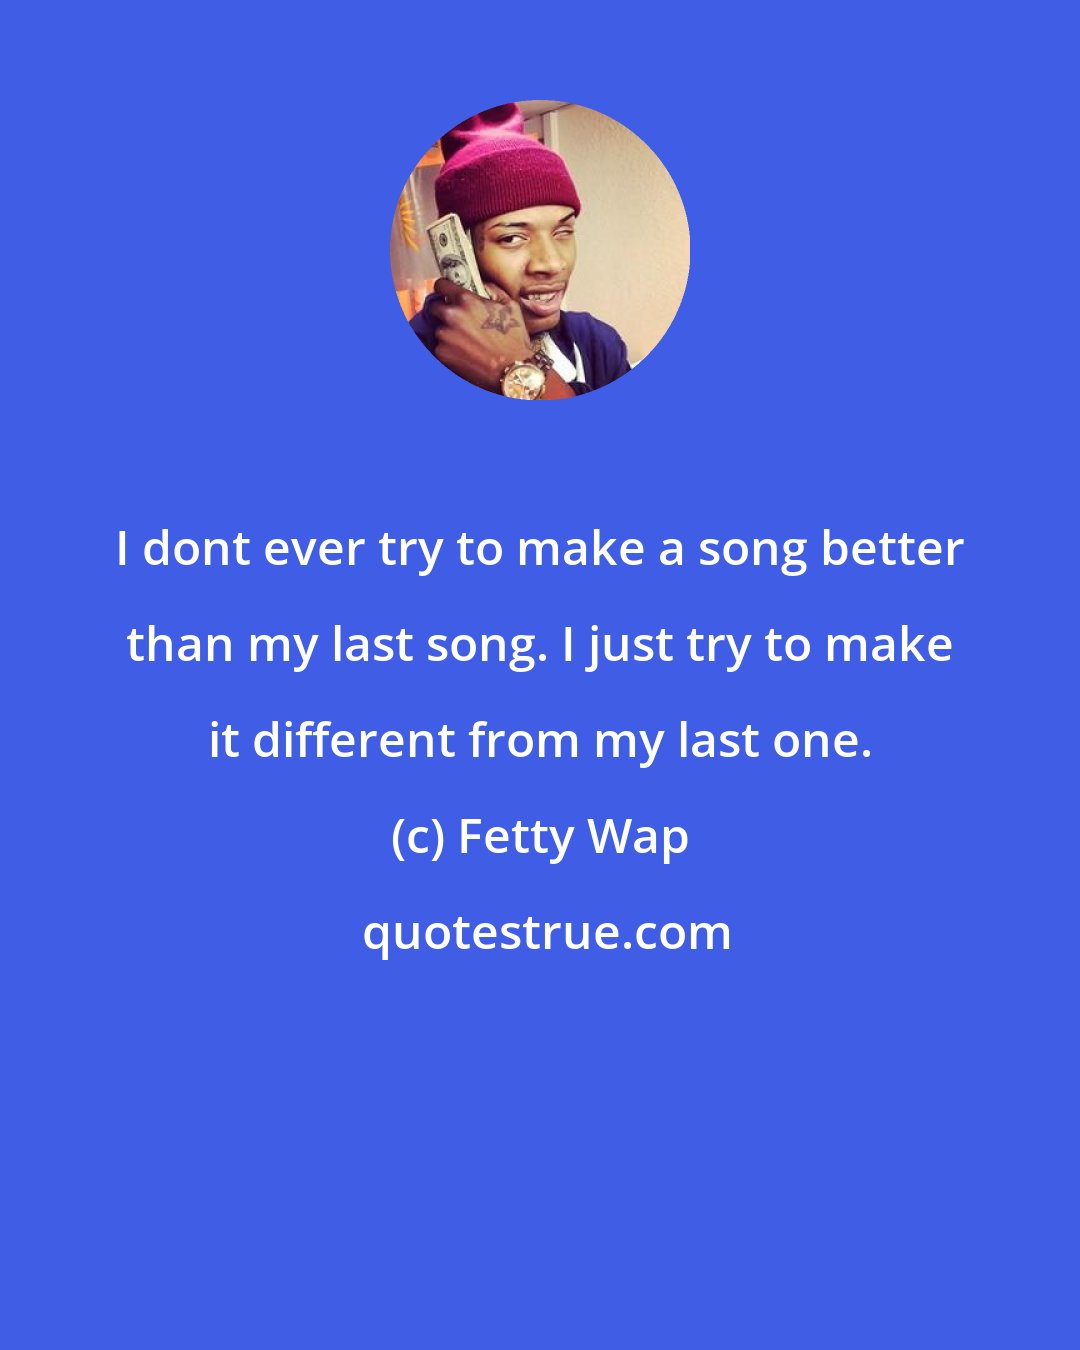 Fetty Wap: I dont ever try to make a song better than my last song. I just try to make it different from my last one.